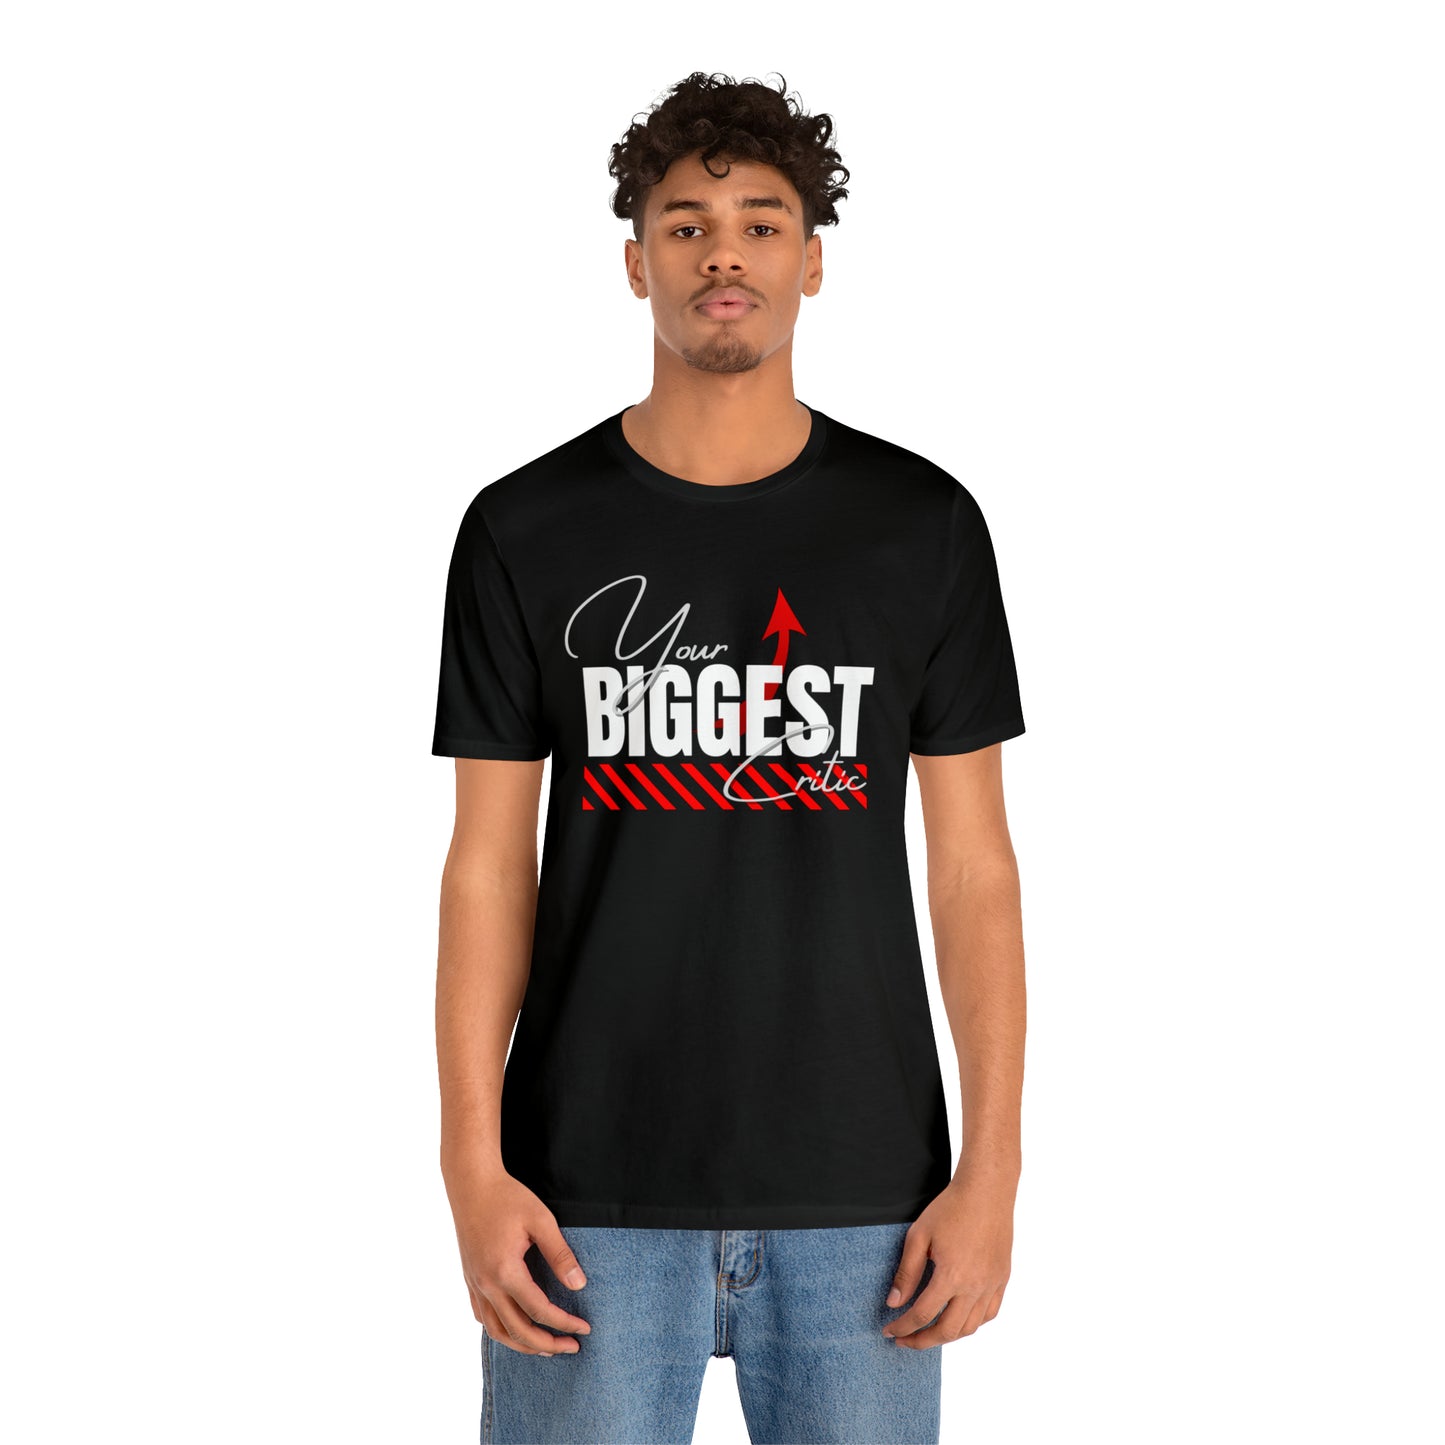 Your Biggest Critic Unisex Tee - AH VISION